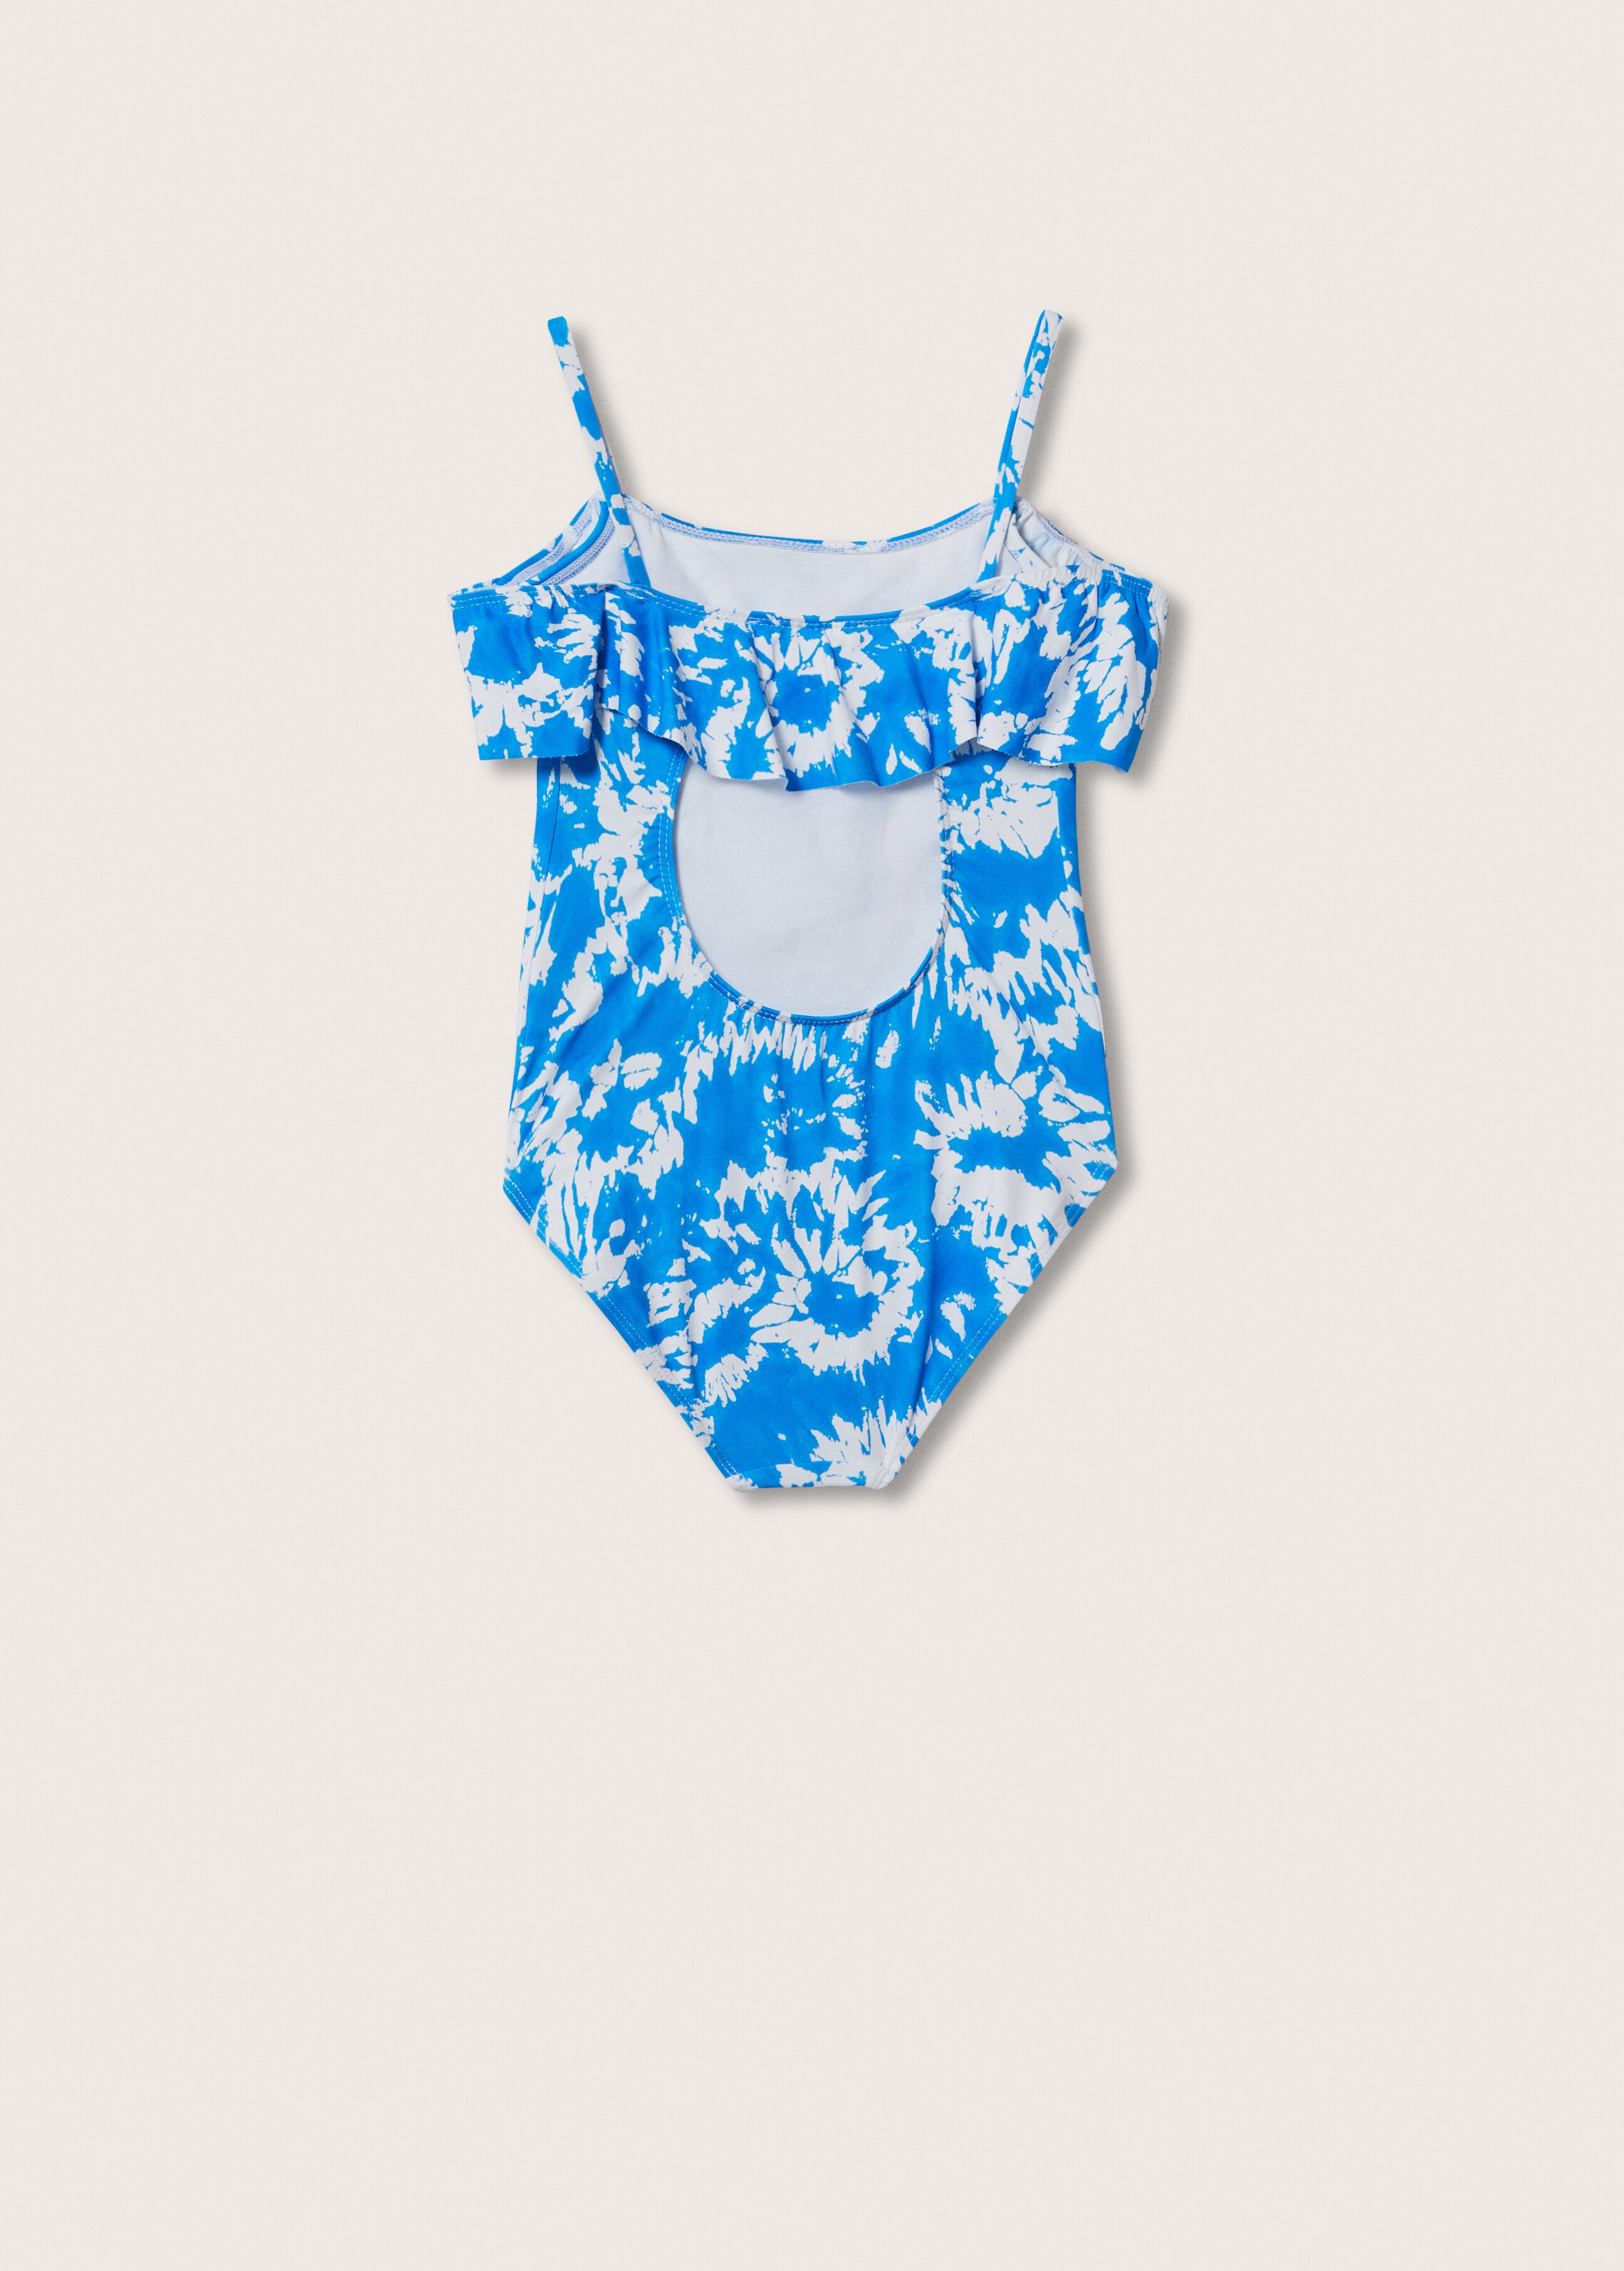 Tie-dye print swimsuit - Reverse of the article